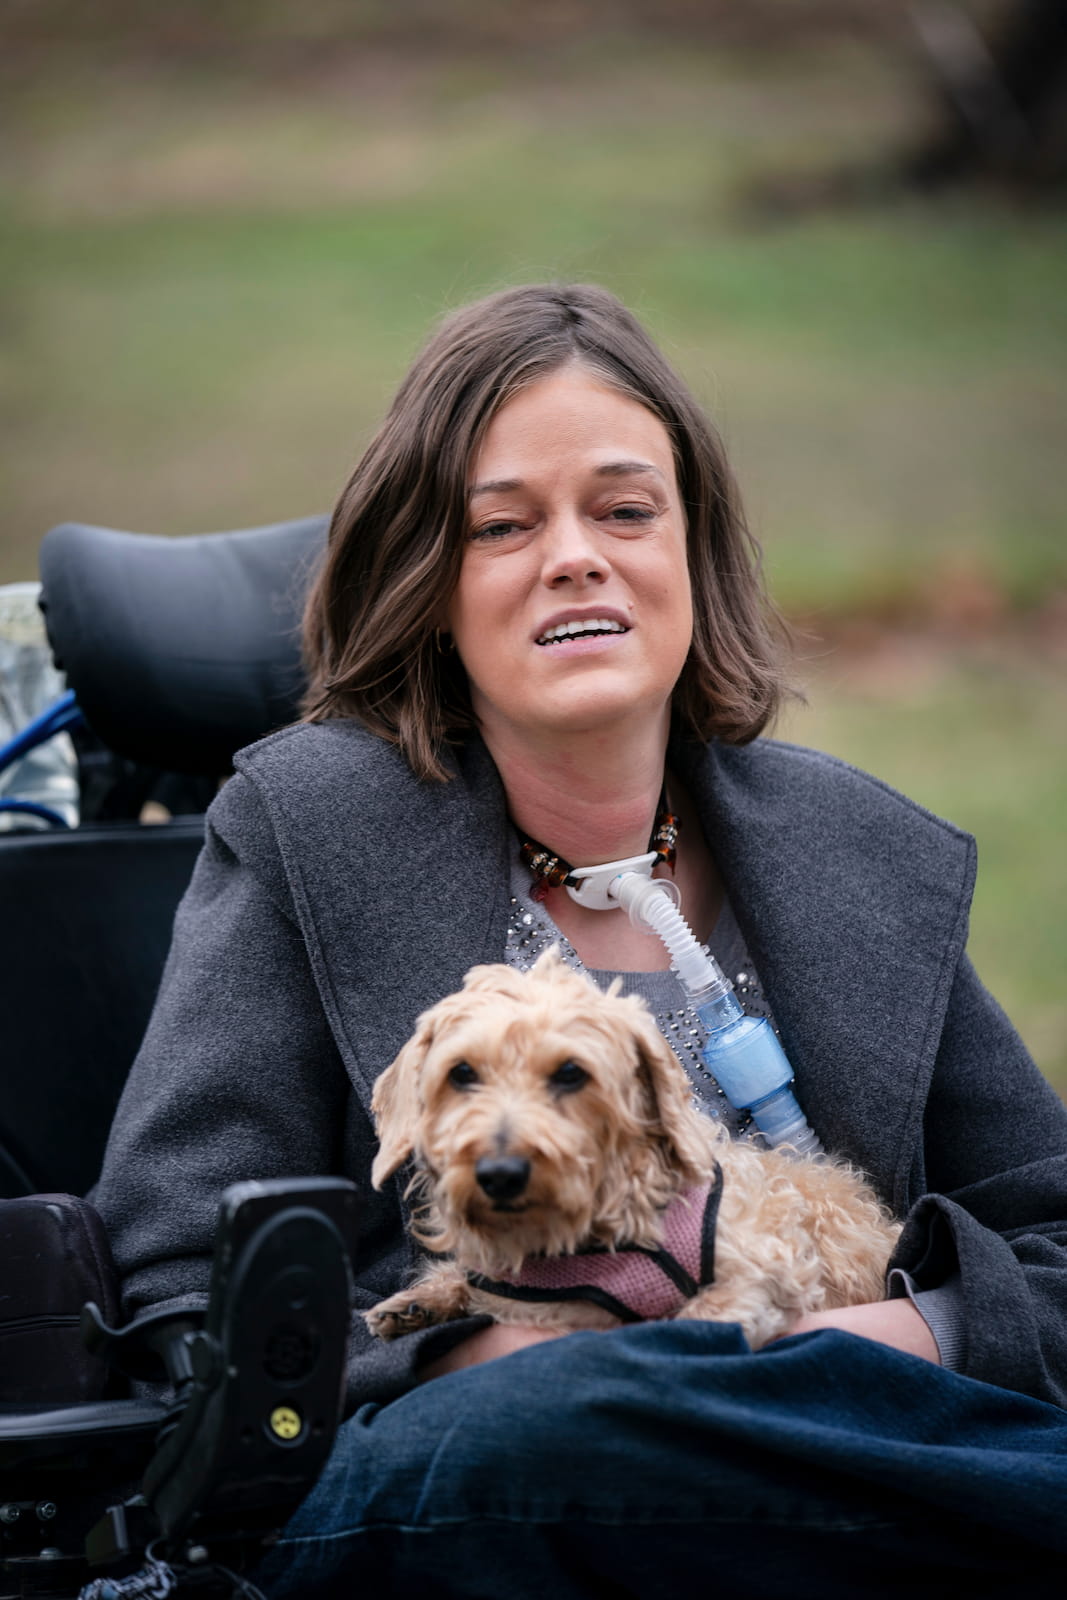 Josie, a white woman with medium length brown hair holds her small dog in her lap outside in her wheelchair. She uses a breathing tube